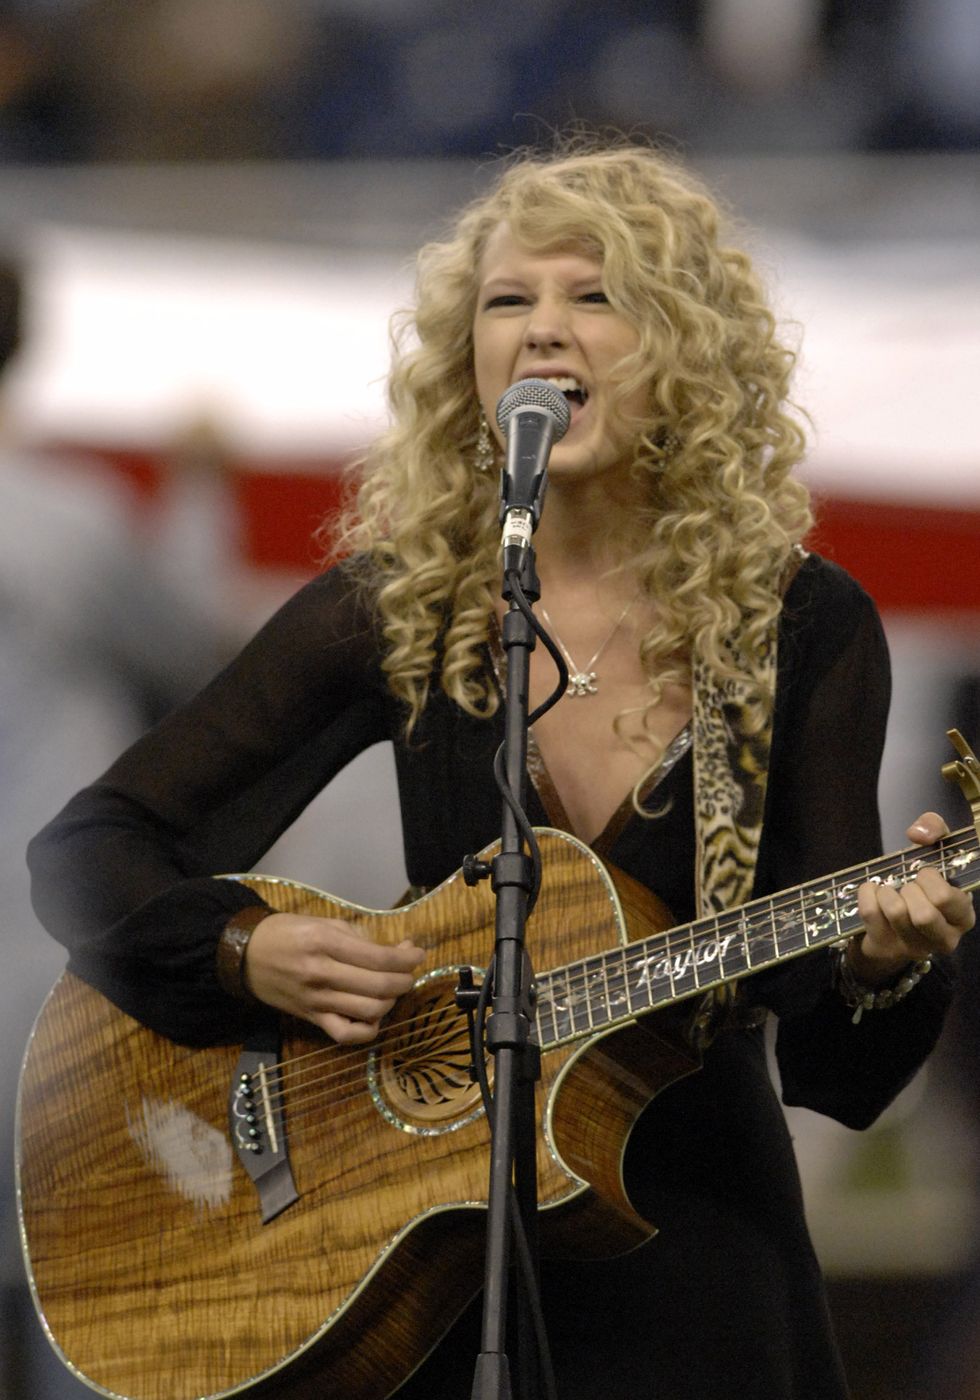 <p>In one of her earliest televised performances, Taylor Swift belted out the&nbsp;National Anthem at the&nbsp;Detroit Lions/Miami Dolphins&nbsp;Thanksgiving Day game in&nbsp;2006<span class="redactor-invisible-space" data-verified="redactor" data-redactor-tag="span" data-redactor-class="redactor-invisible-space">—complete with her acoustic guitar and old-school curls.&nbsp;</span></p>